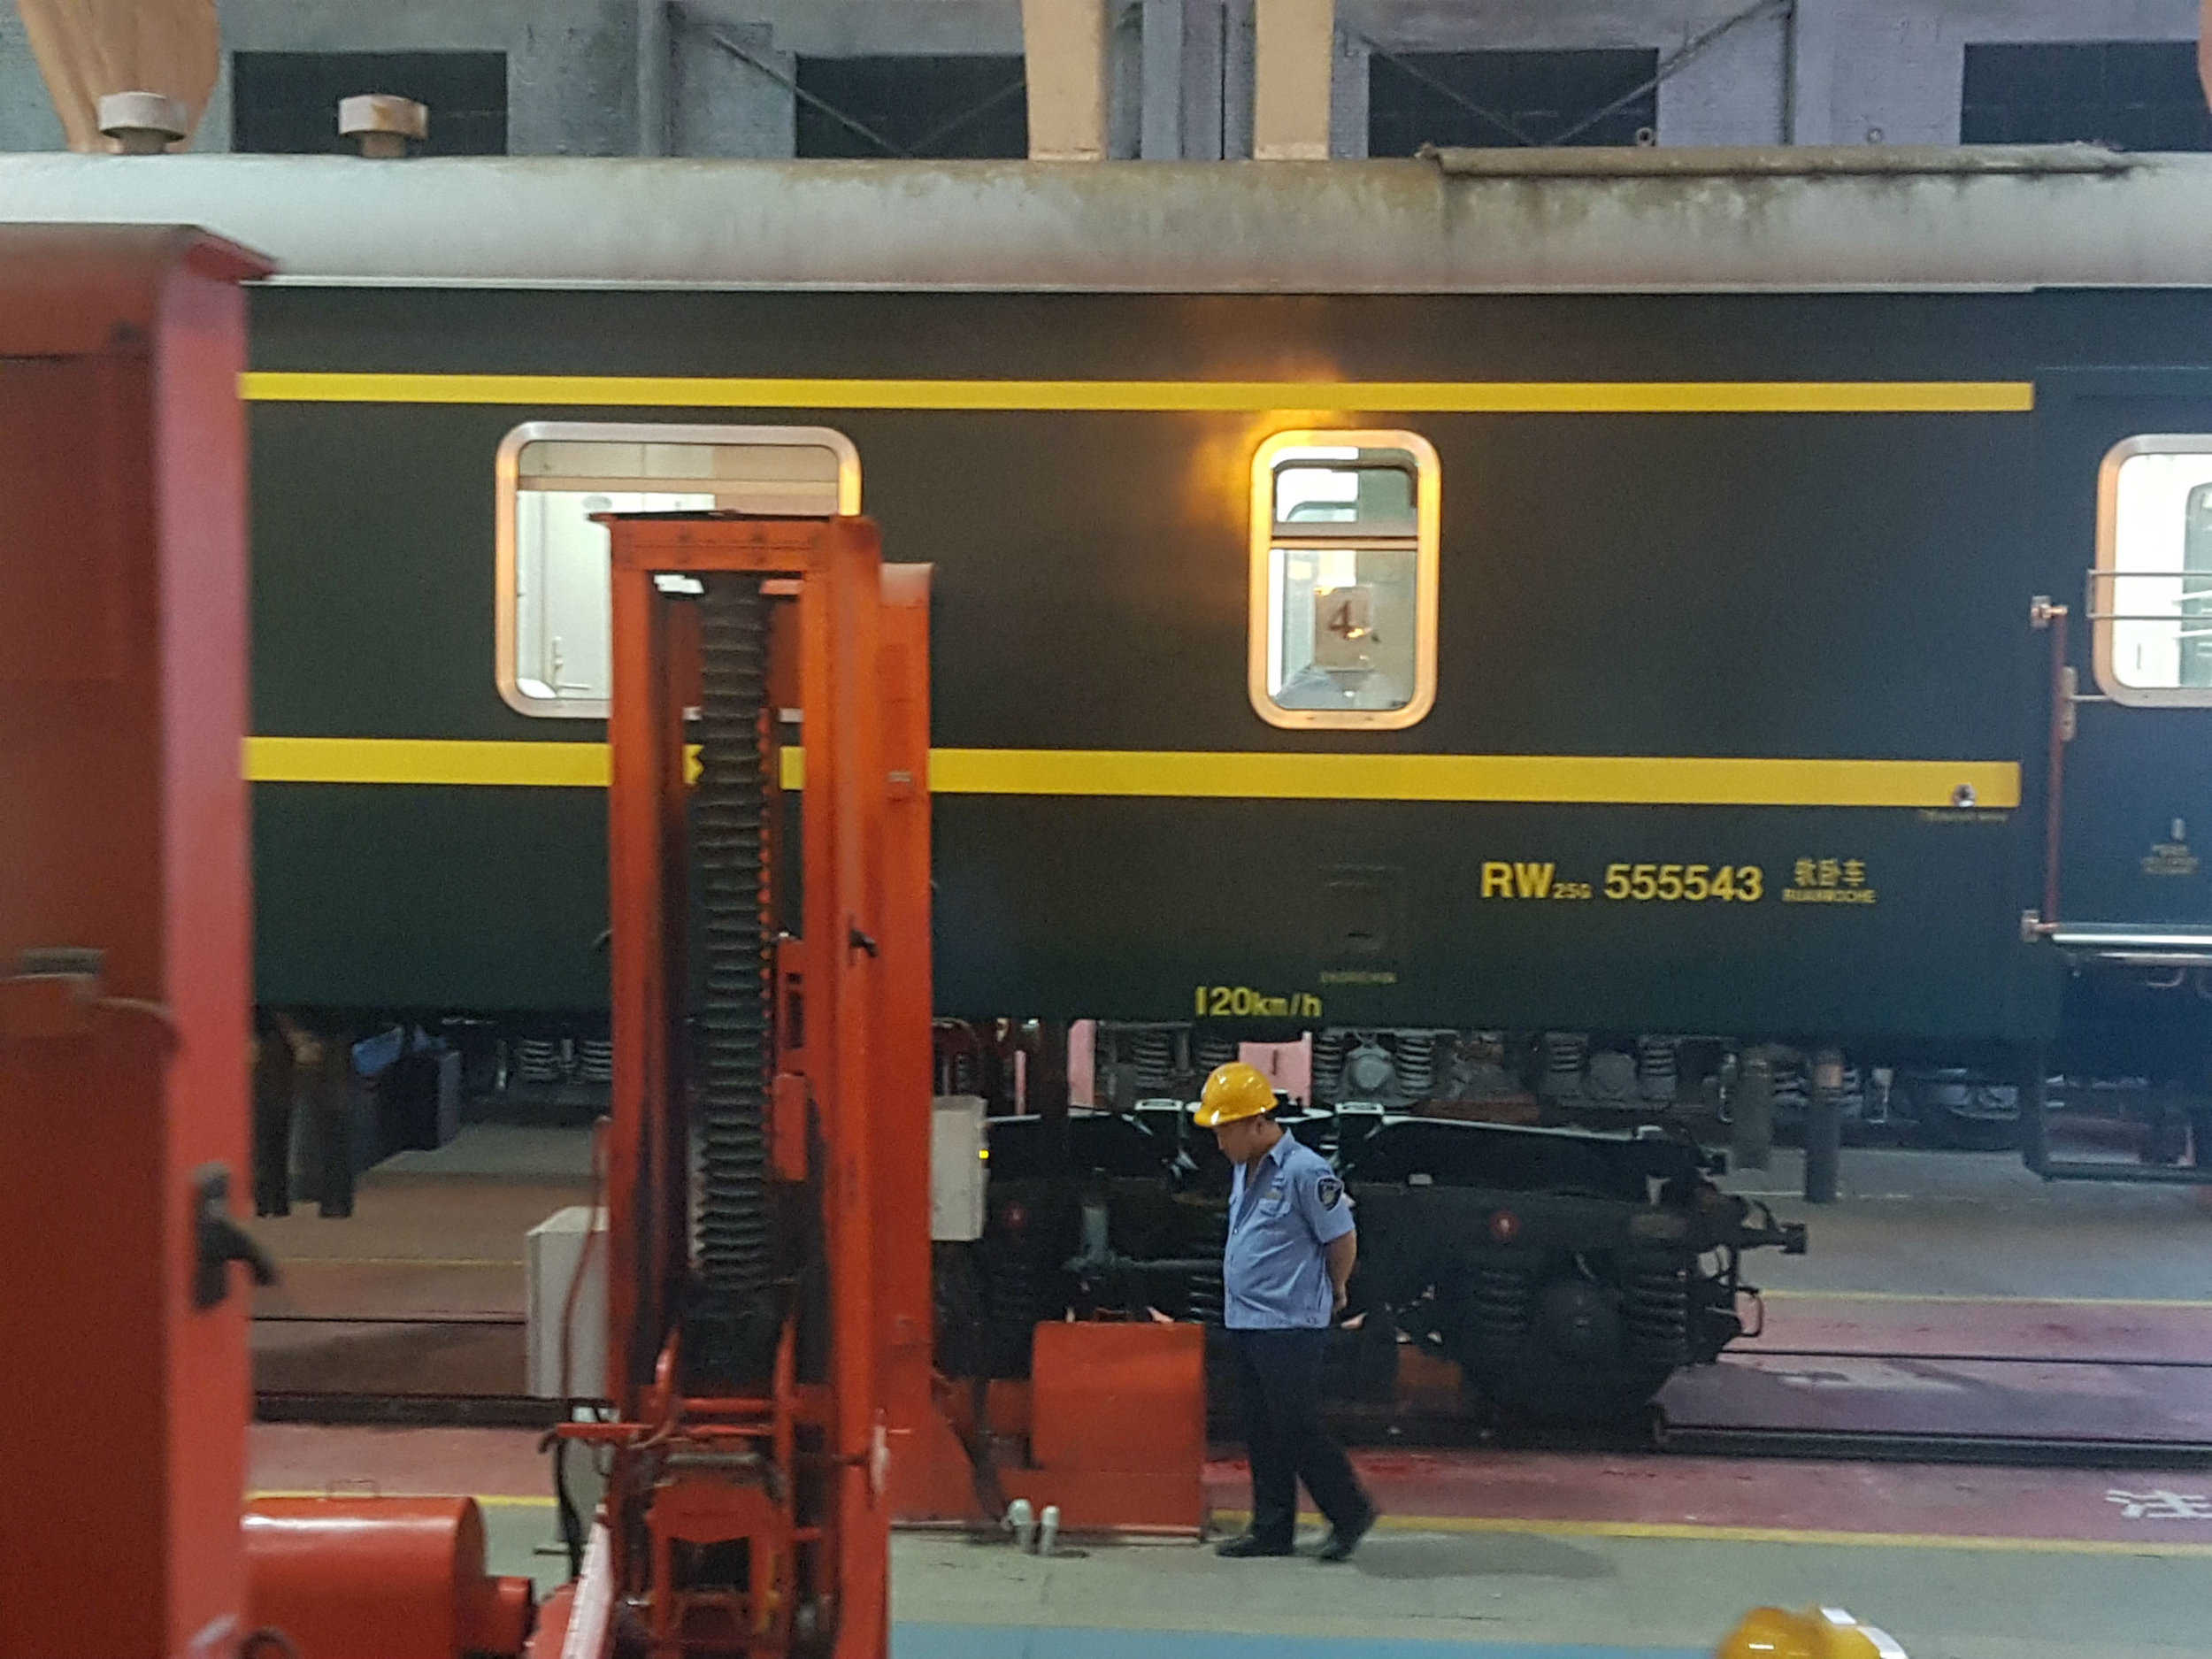 Lifting the train carriage to change its wheels at the Chinese - Mongolian border